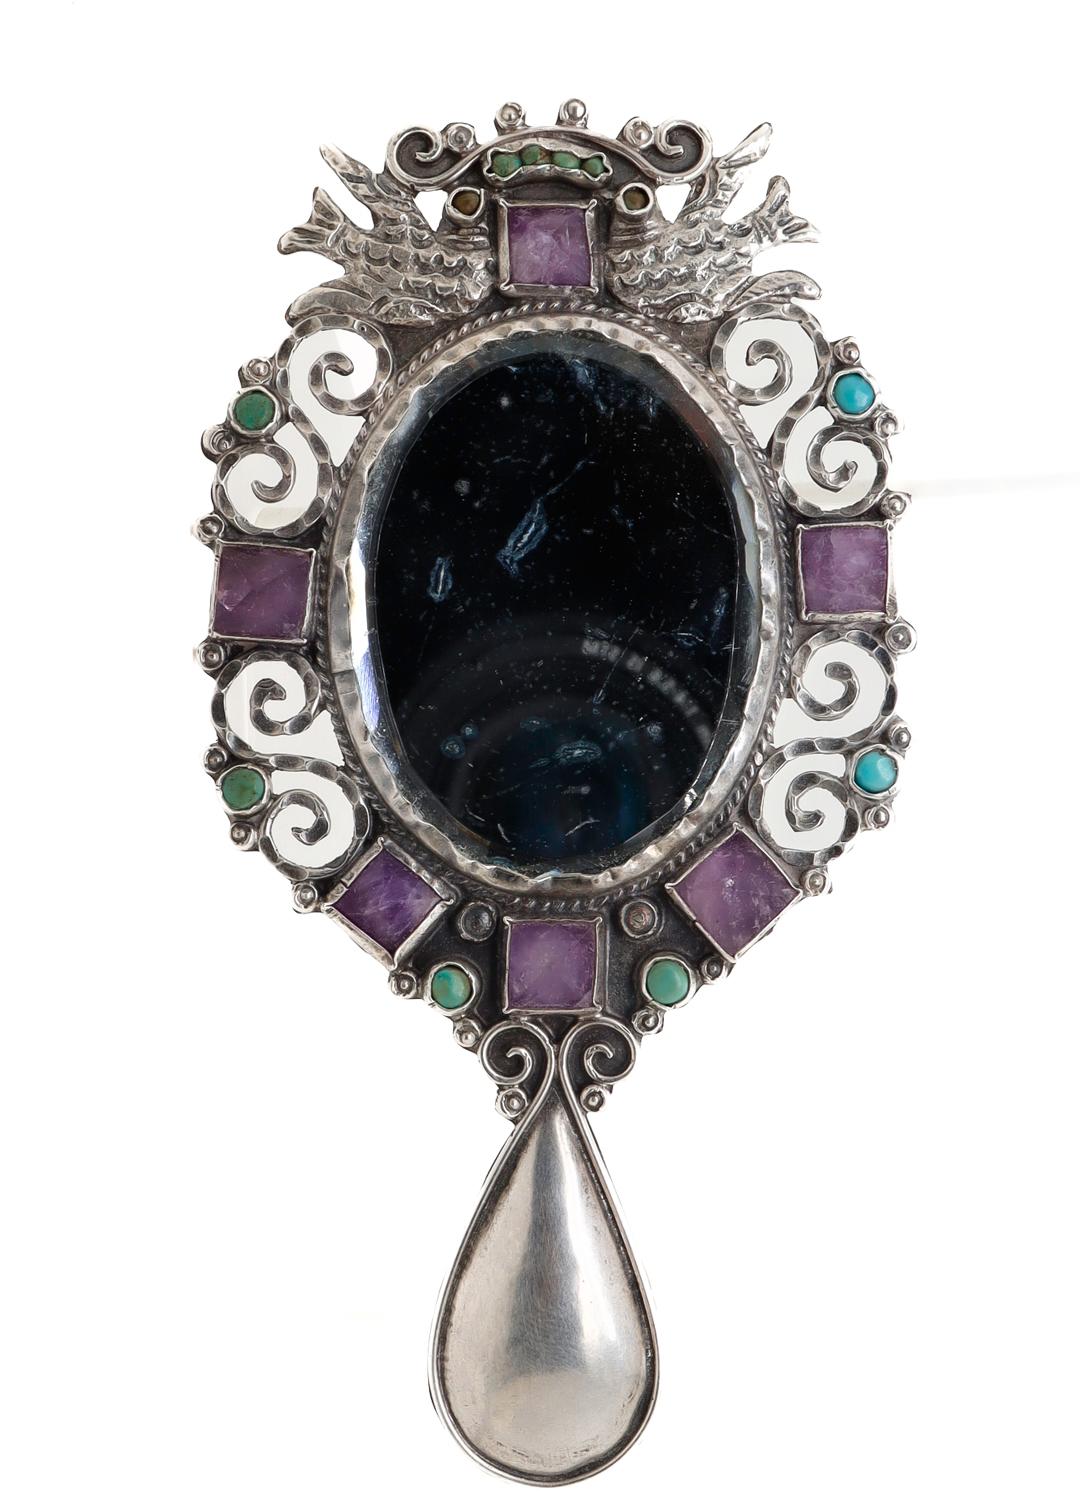 A fine antique Mexican sterling silver hand mirror.

In sterling silver.

By Gustavo Martinez (in the style of Matl or Matilde)

Set throughout with turquoise cabochons and faceted amethysts. The silver is fashioned into various spirals with two